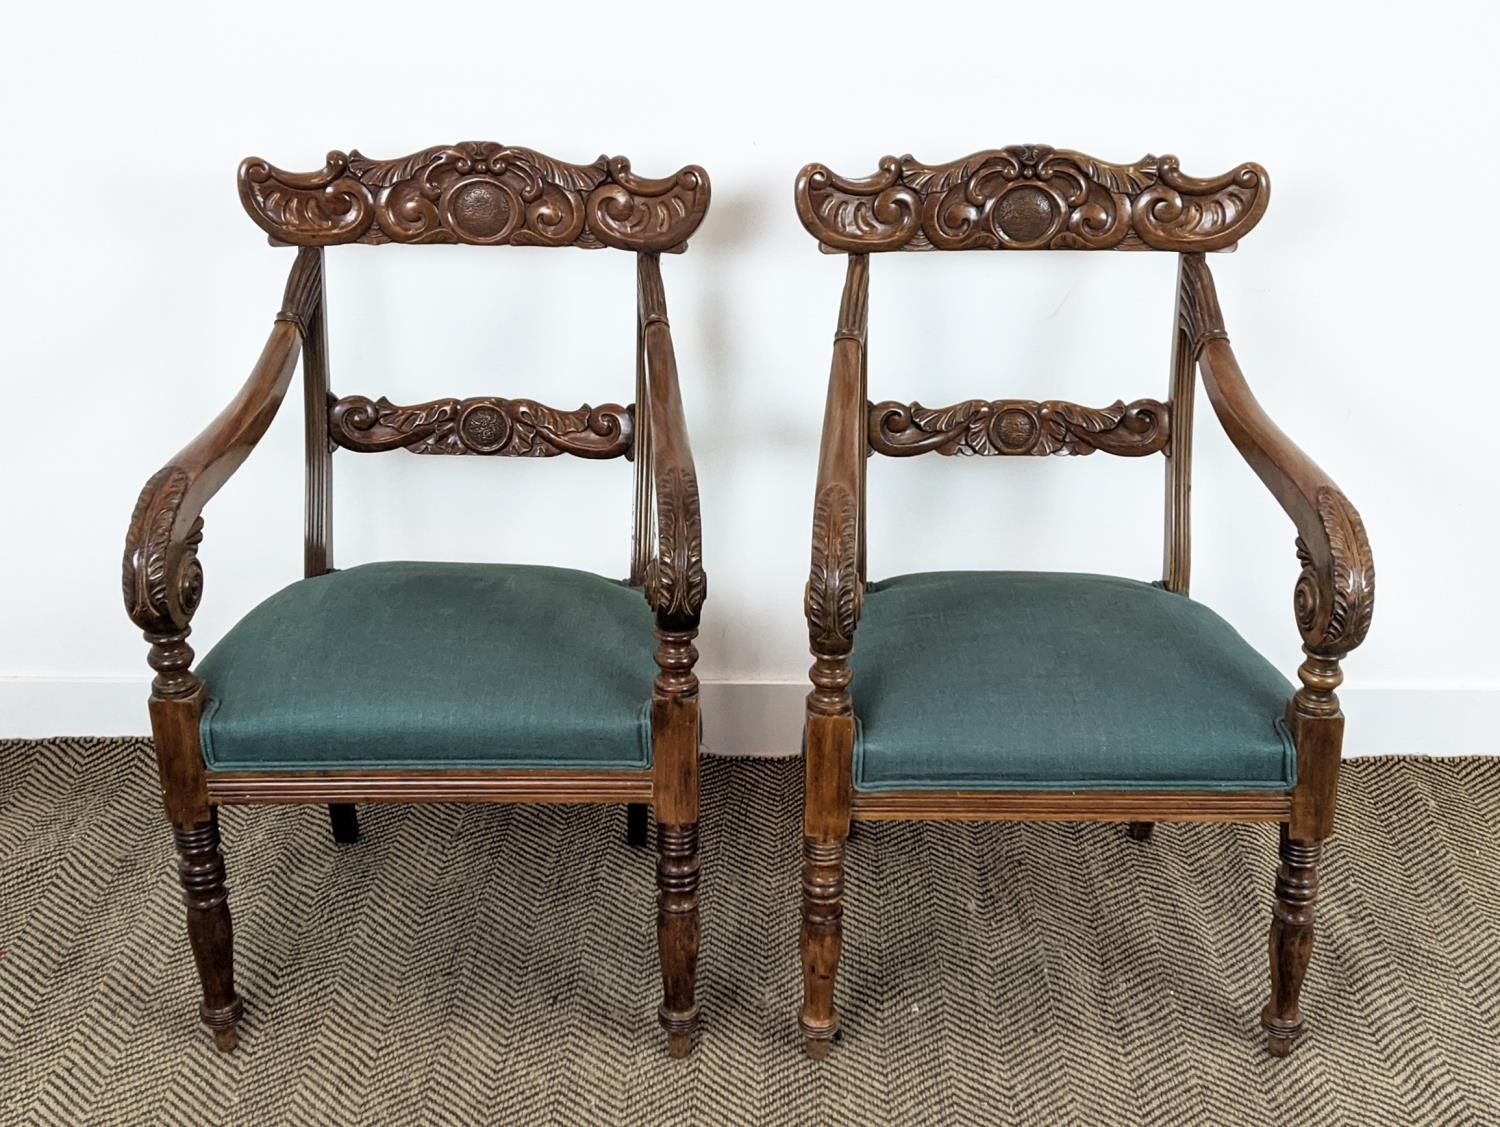 ARMCHAIRS, a pair, mid 19th century mahogany with green stuffover seats, 91cm H x 58cm x 58cm. (2) - Image 4 of 18